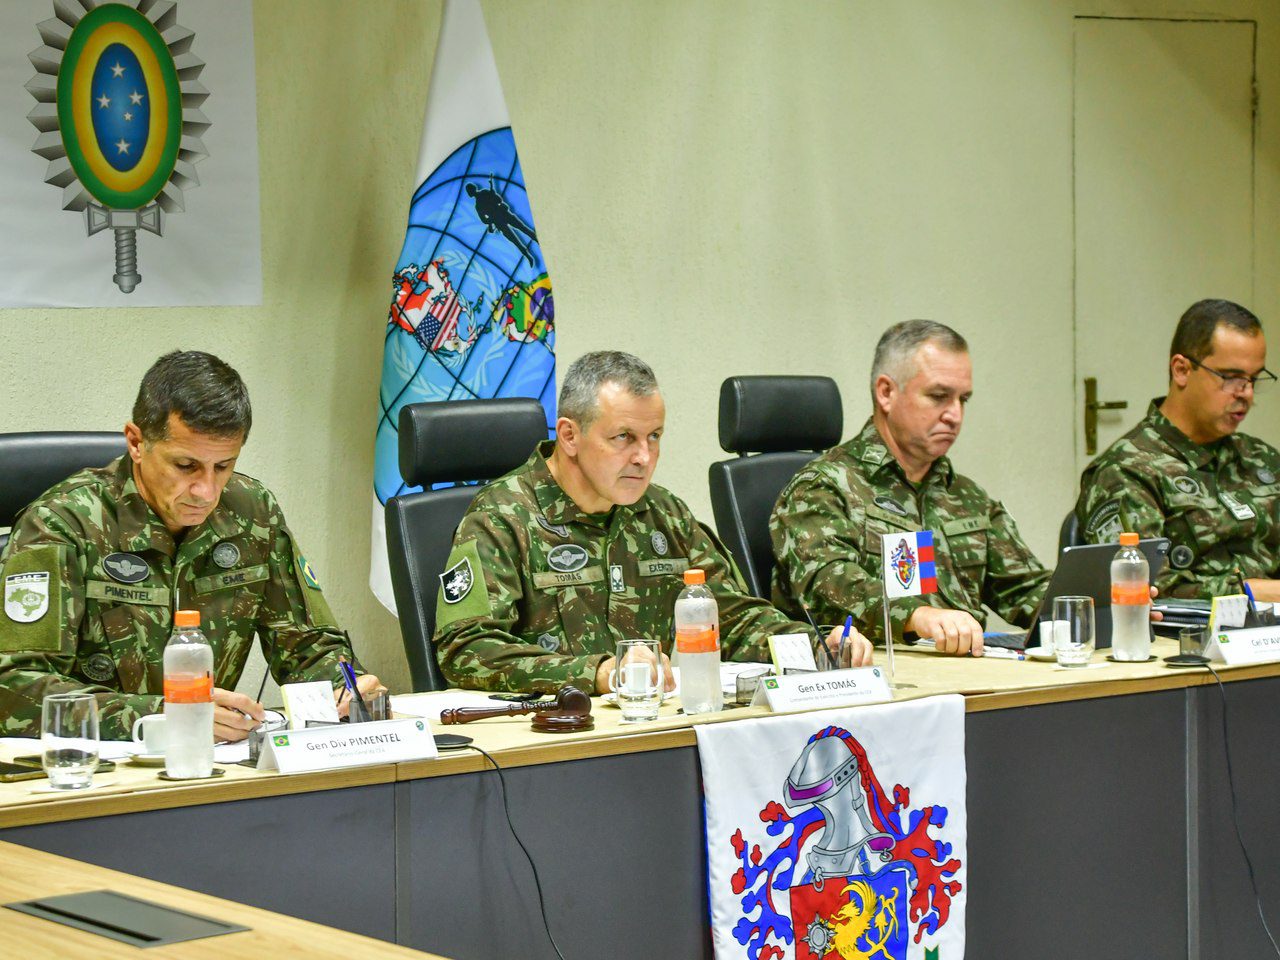 Commanders of the Armies of the Americas meet via videoconference